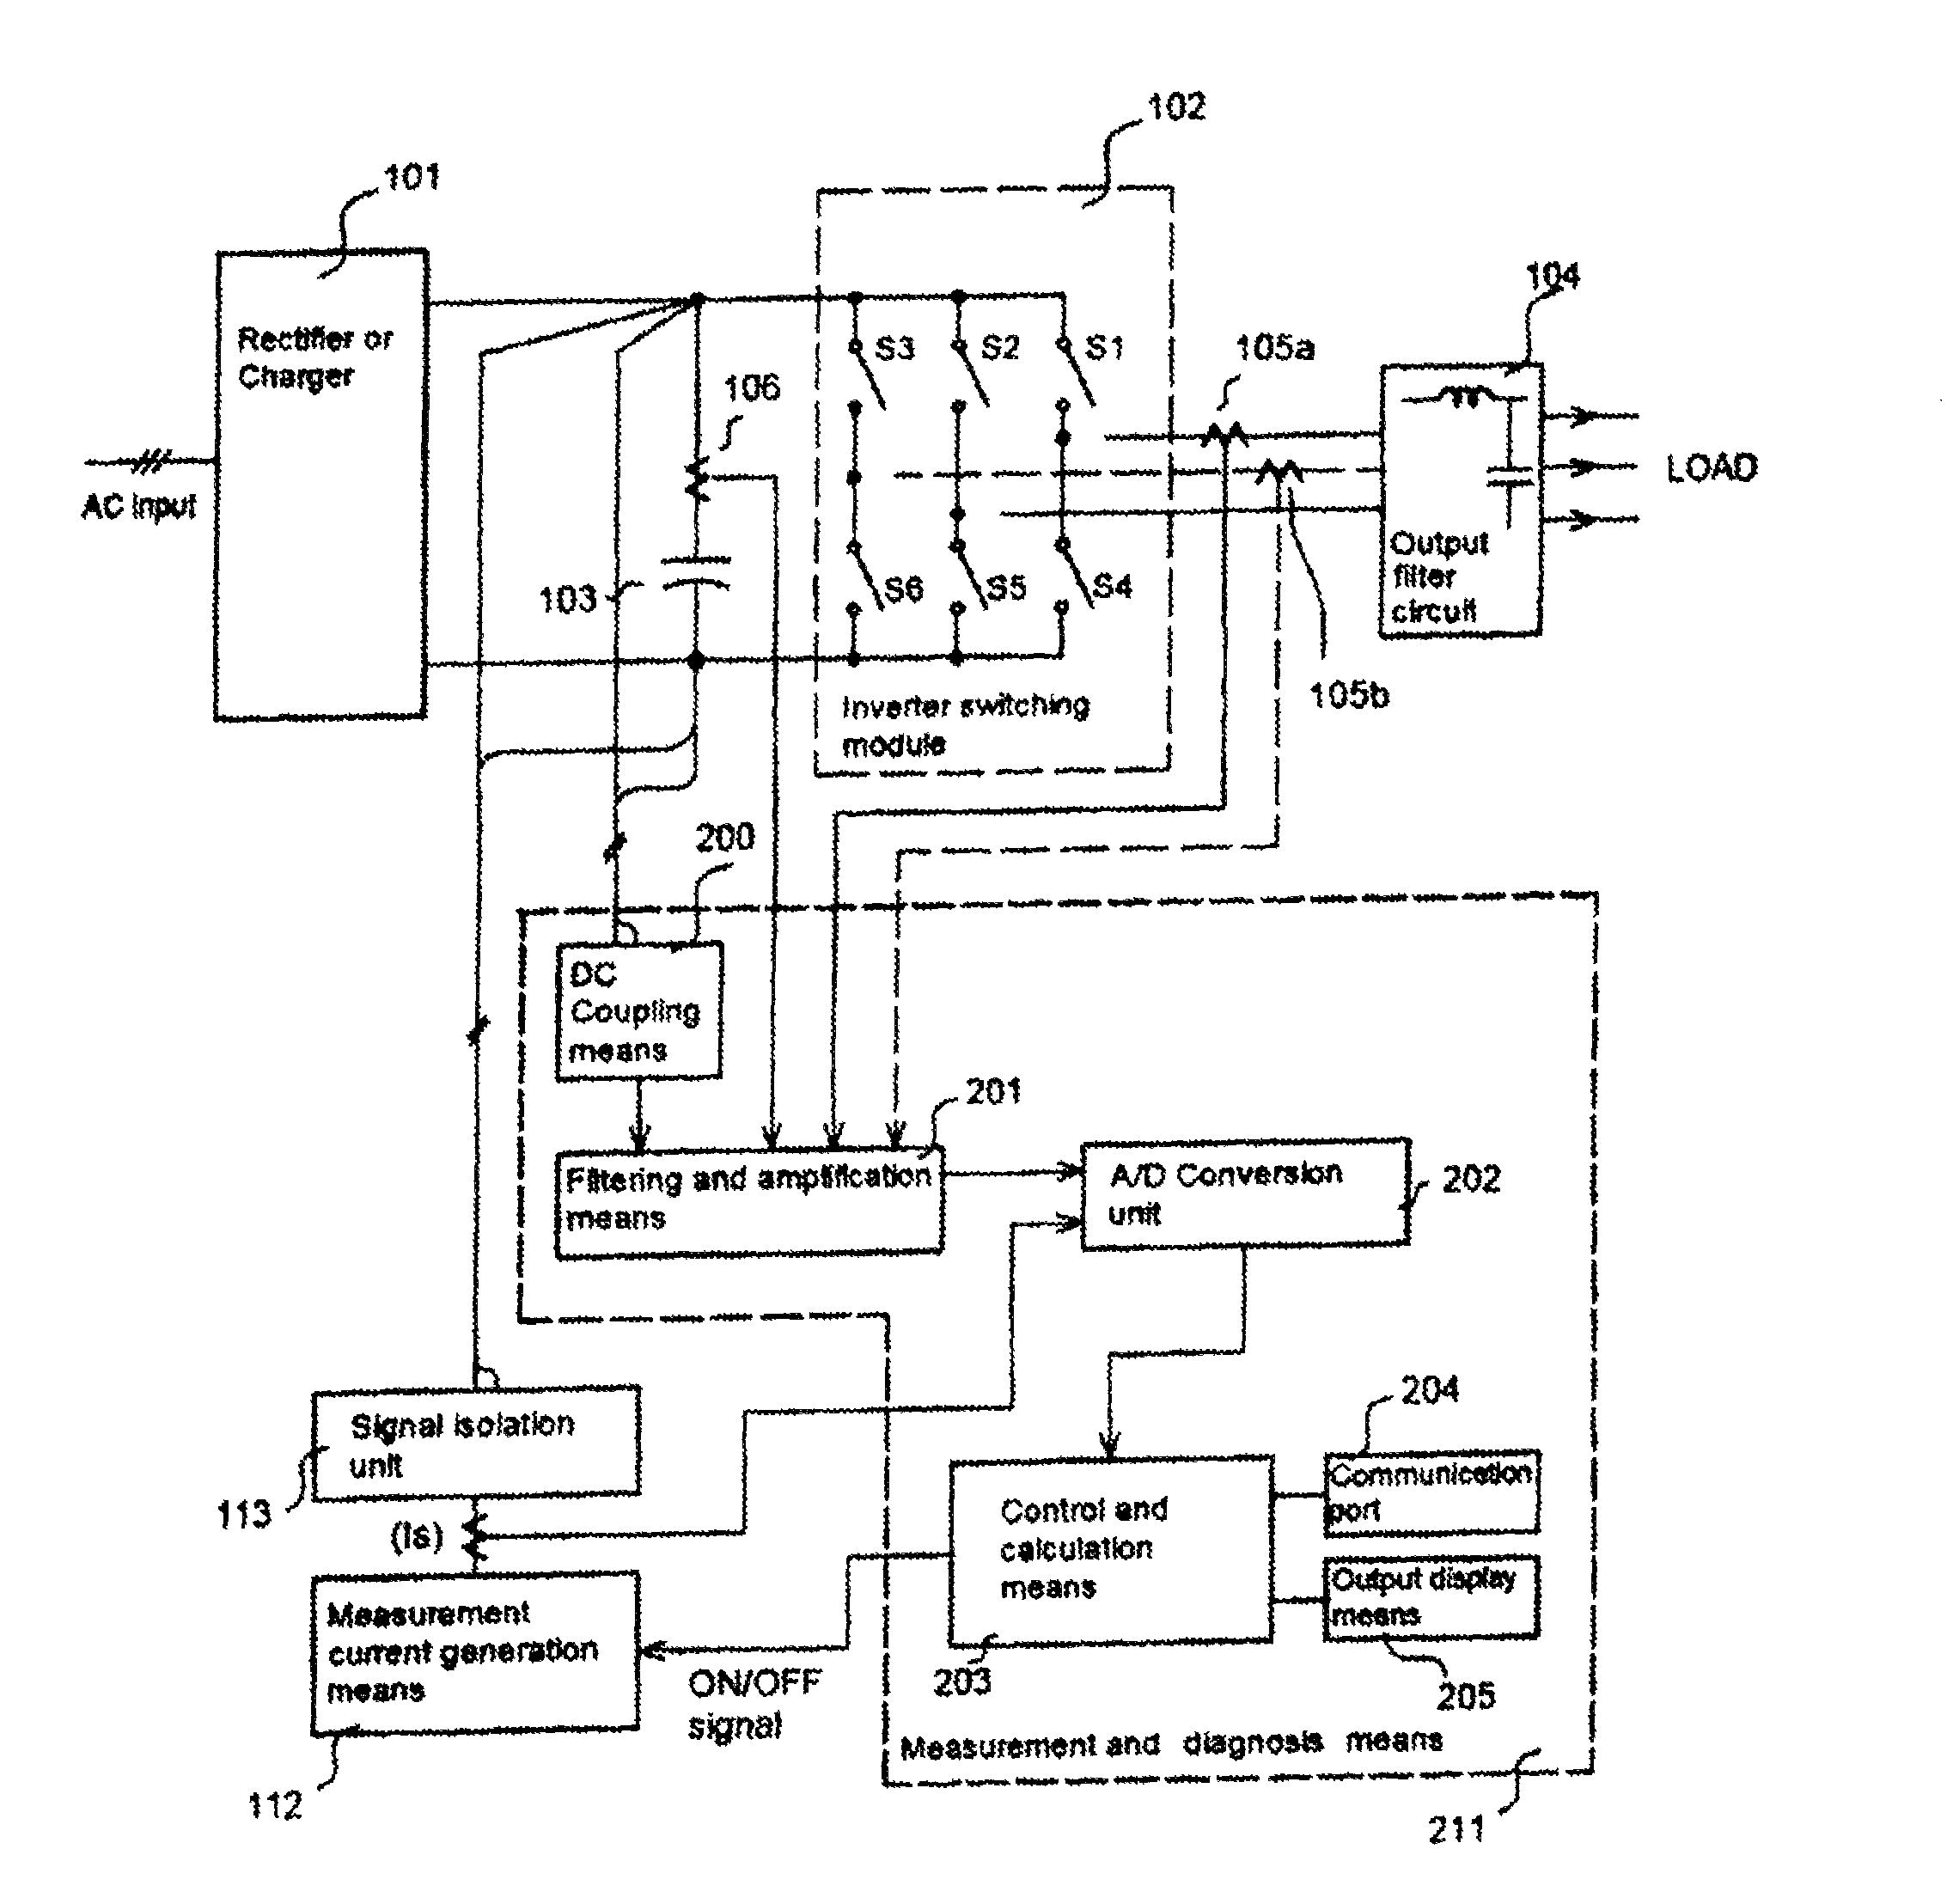 Aging status diagnostic apparatus for power conversion system, and method thereof